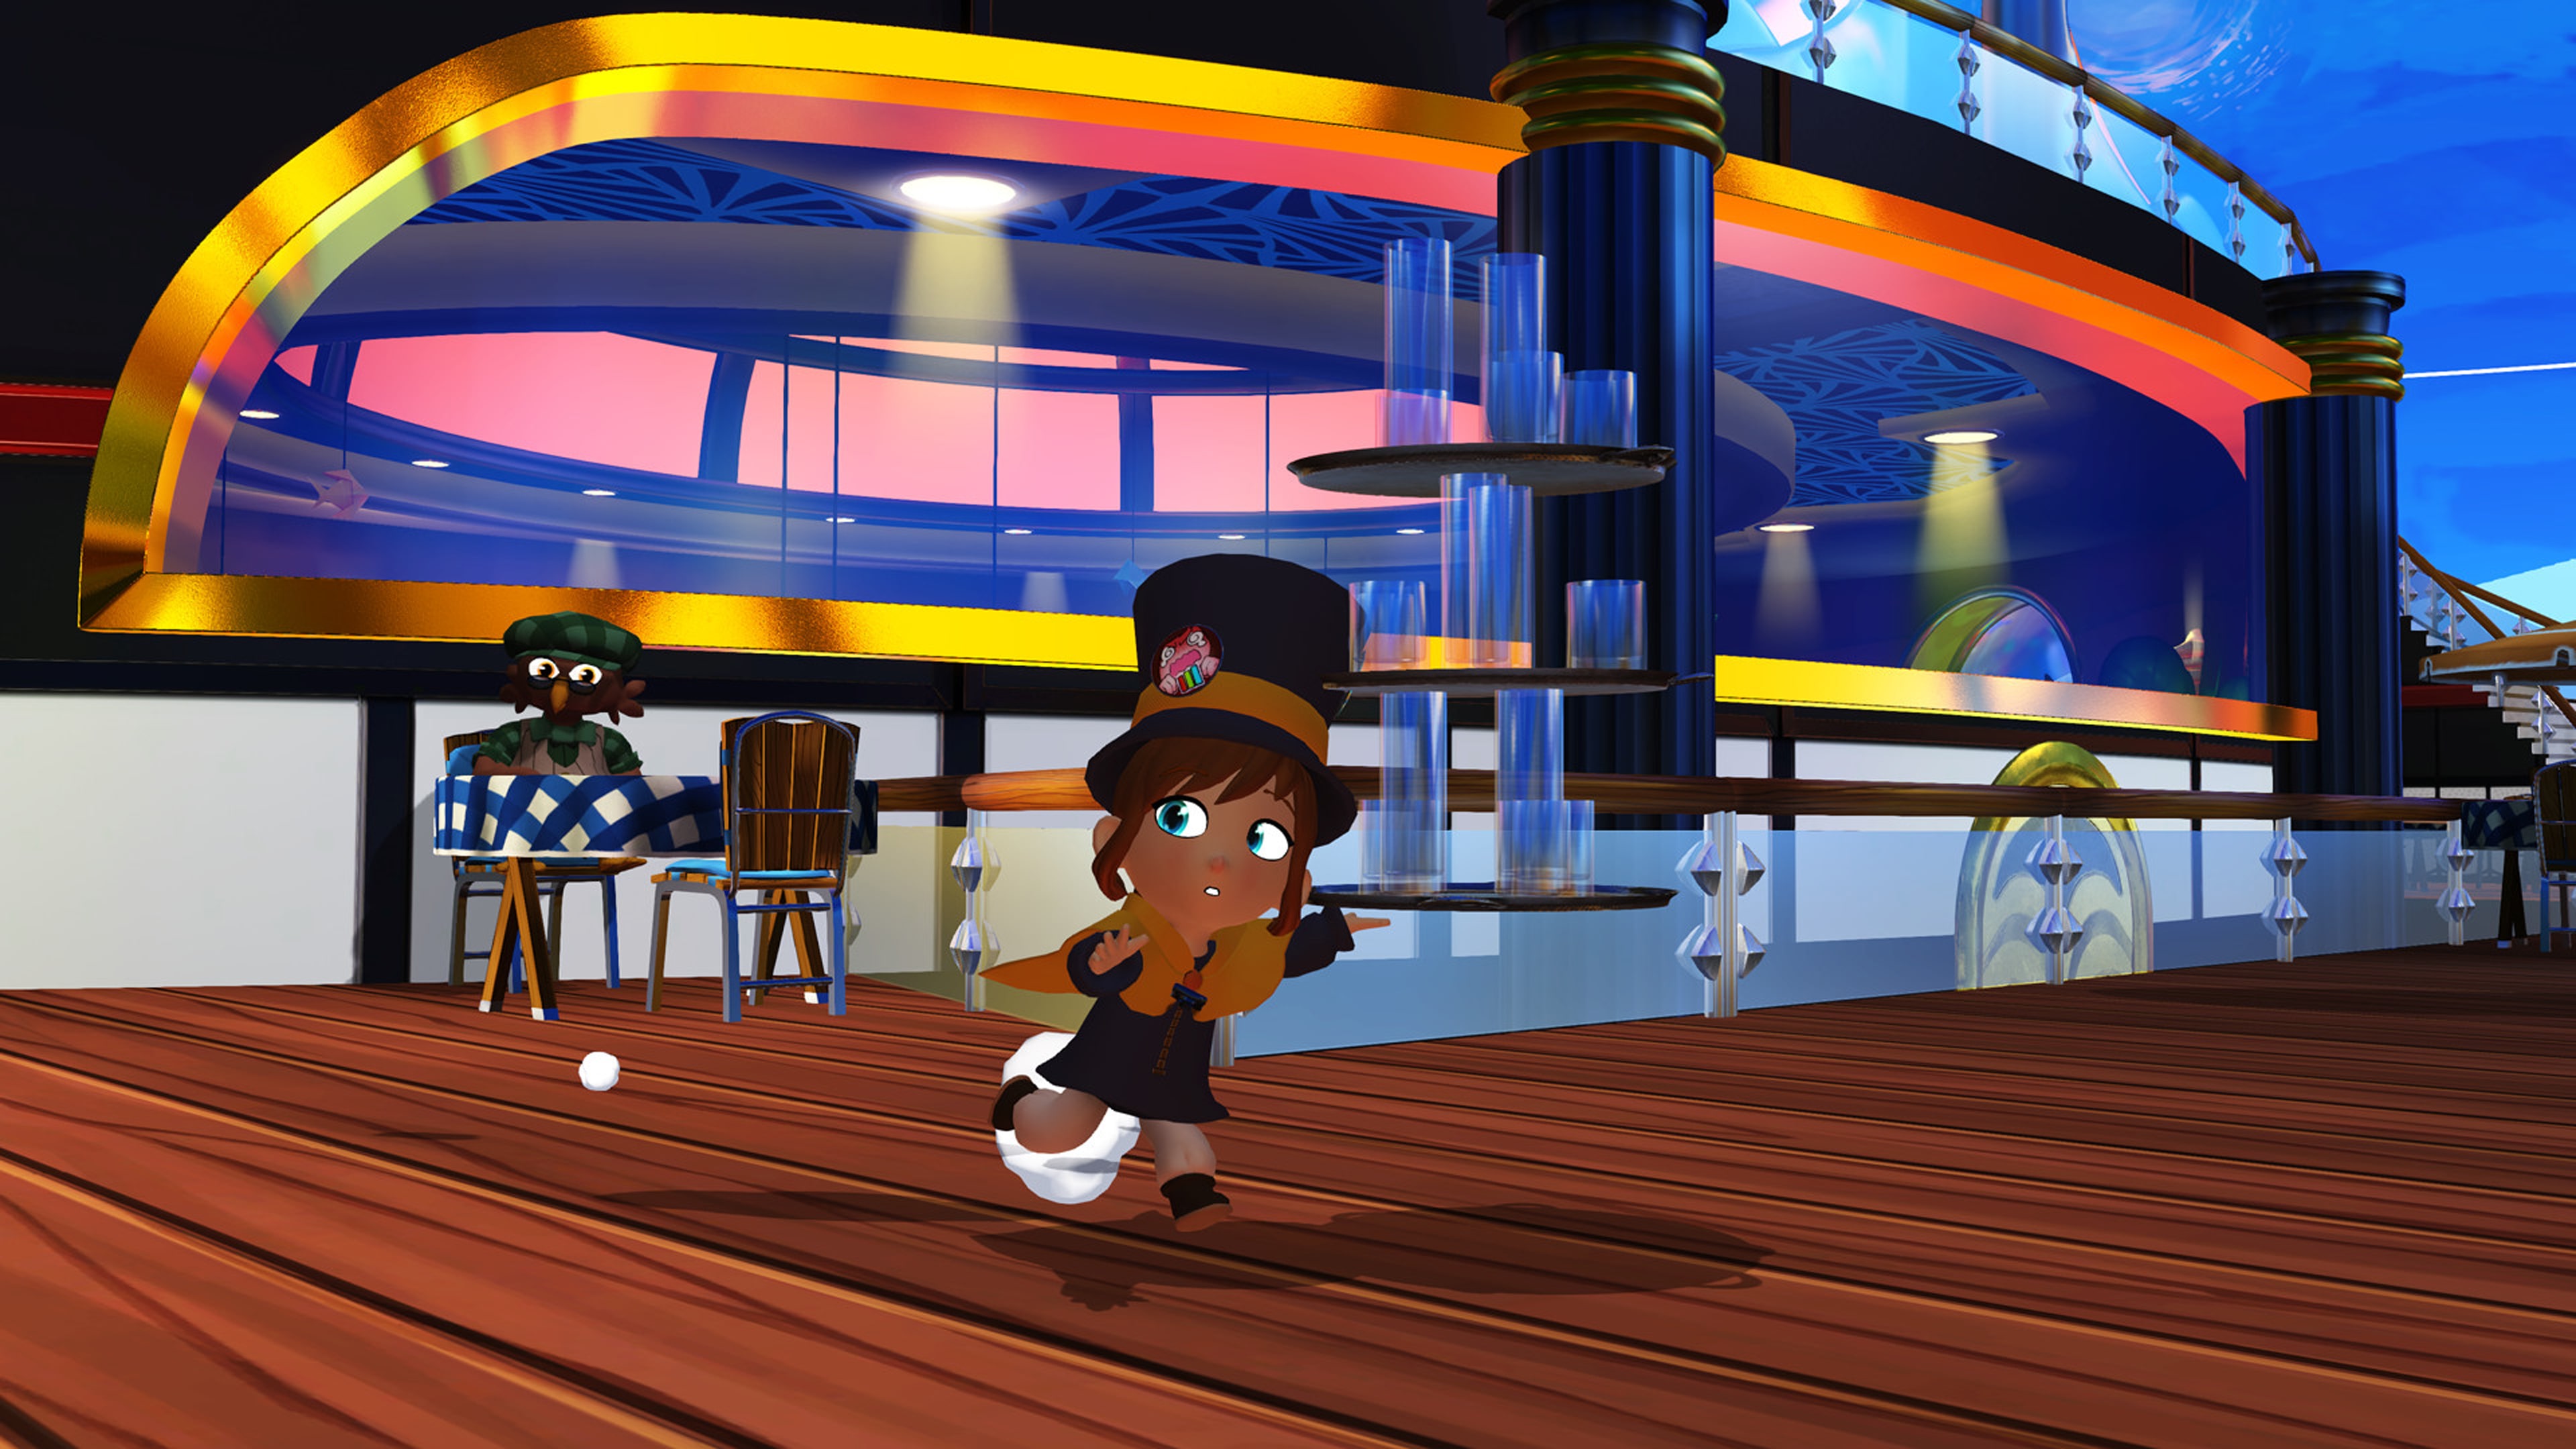 A Hat in Time DLC 'Seal the Deal' and 'Nyakuza Metro' coming to